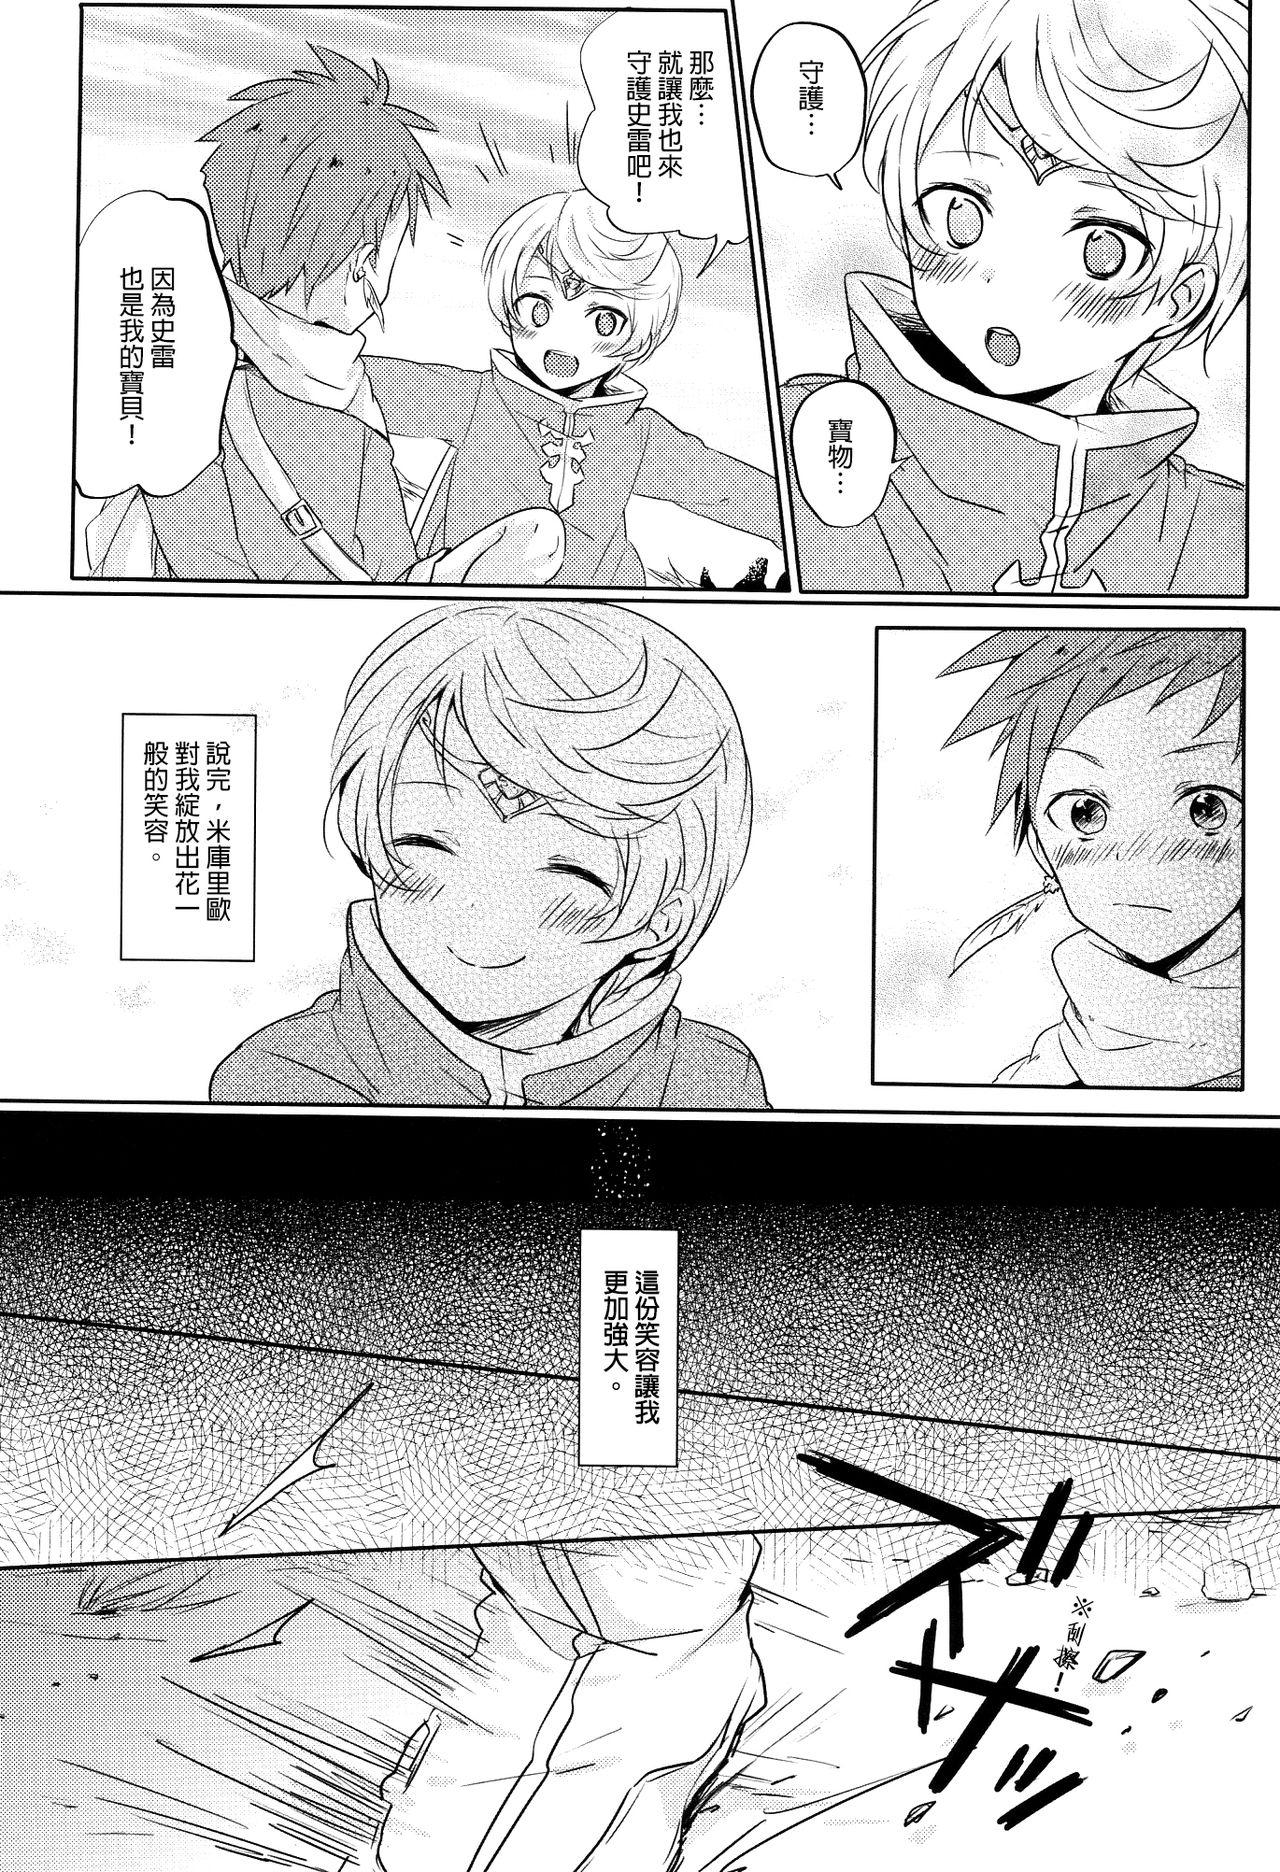 Spooning Kalanchoe - Tales of zestiria Camgirls - Page 7